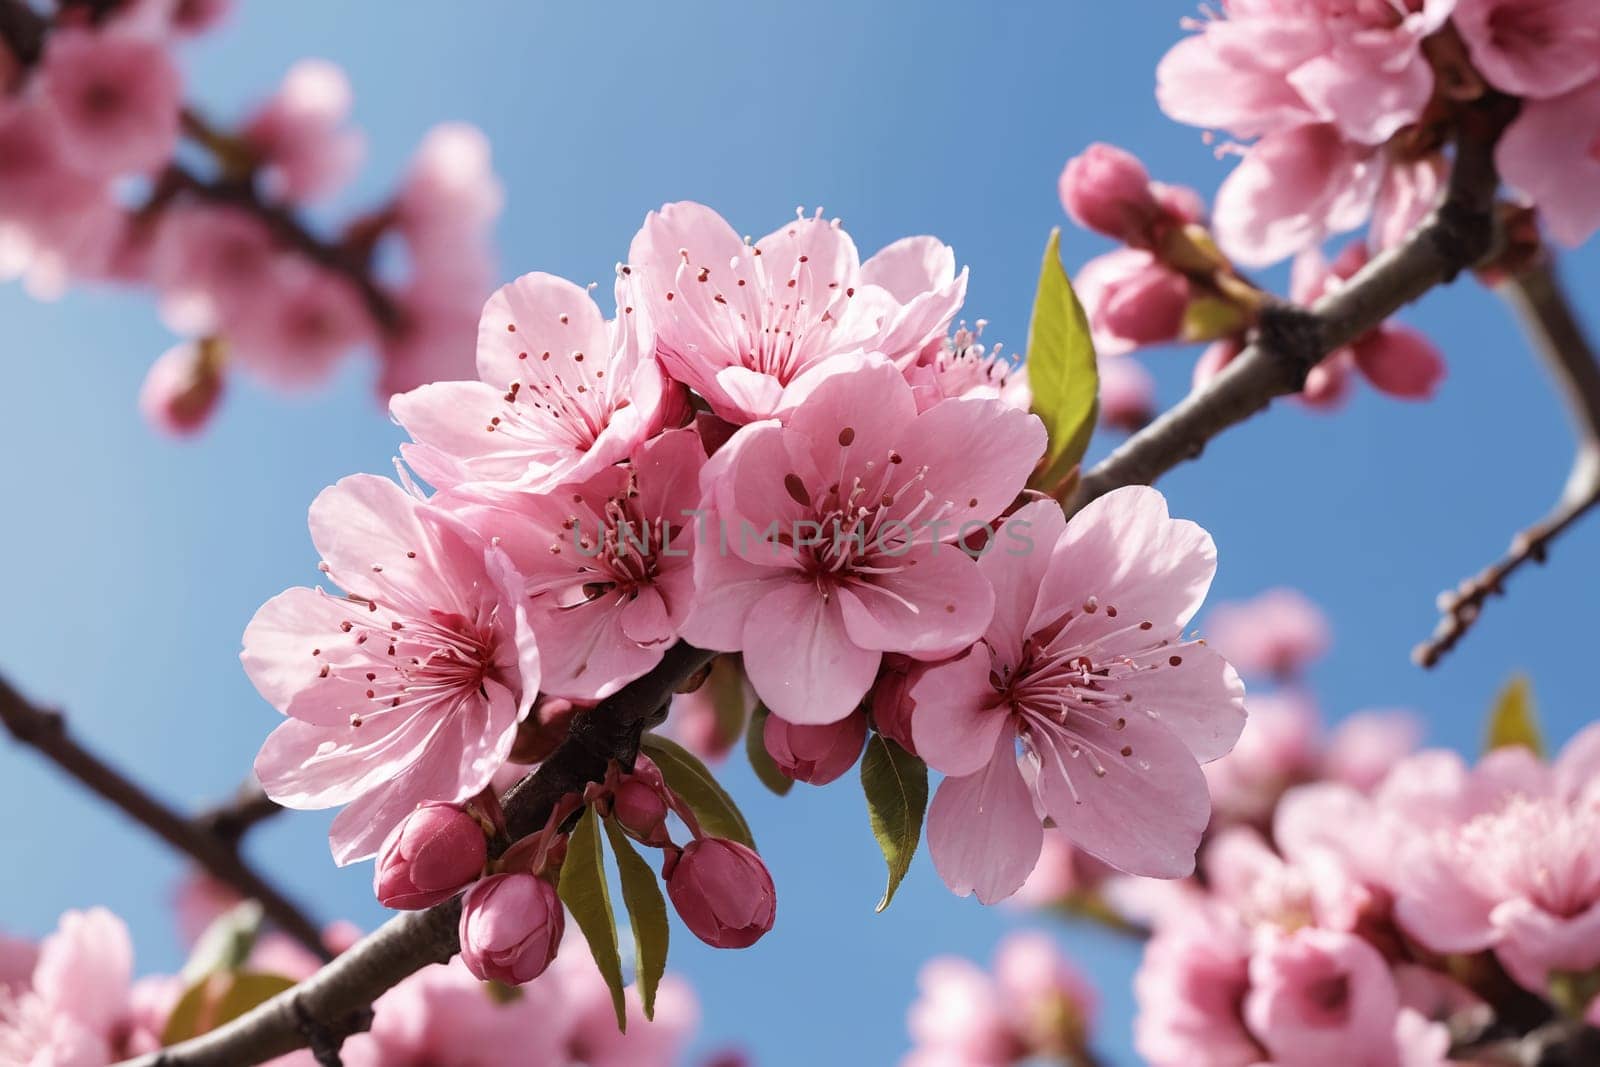 The bloom of cherry blossoms, a vivid symbol of life s fleeting beauty, set against a serene blue backdrop.